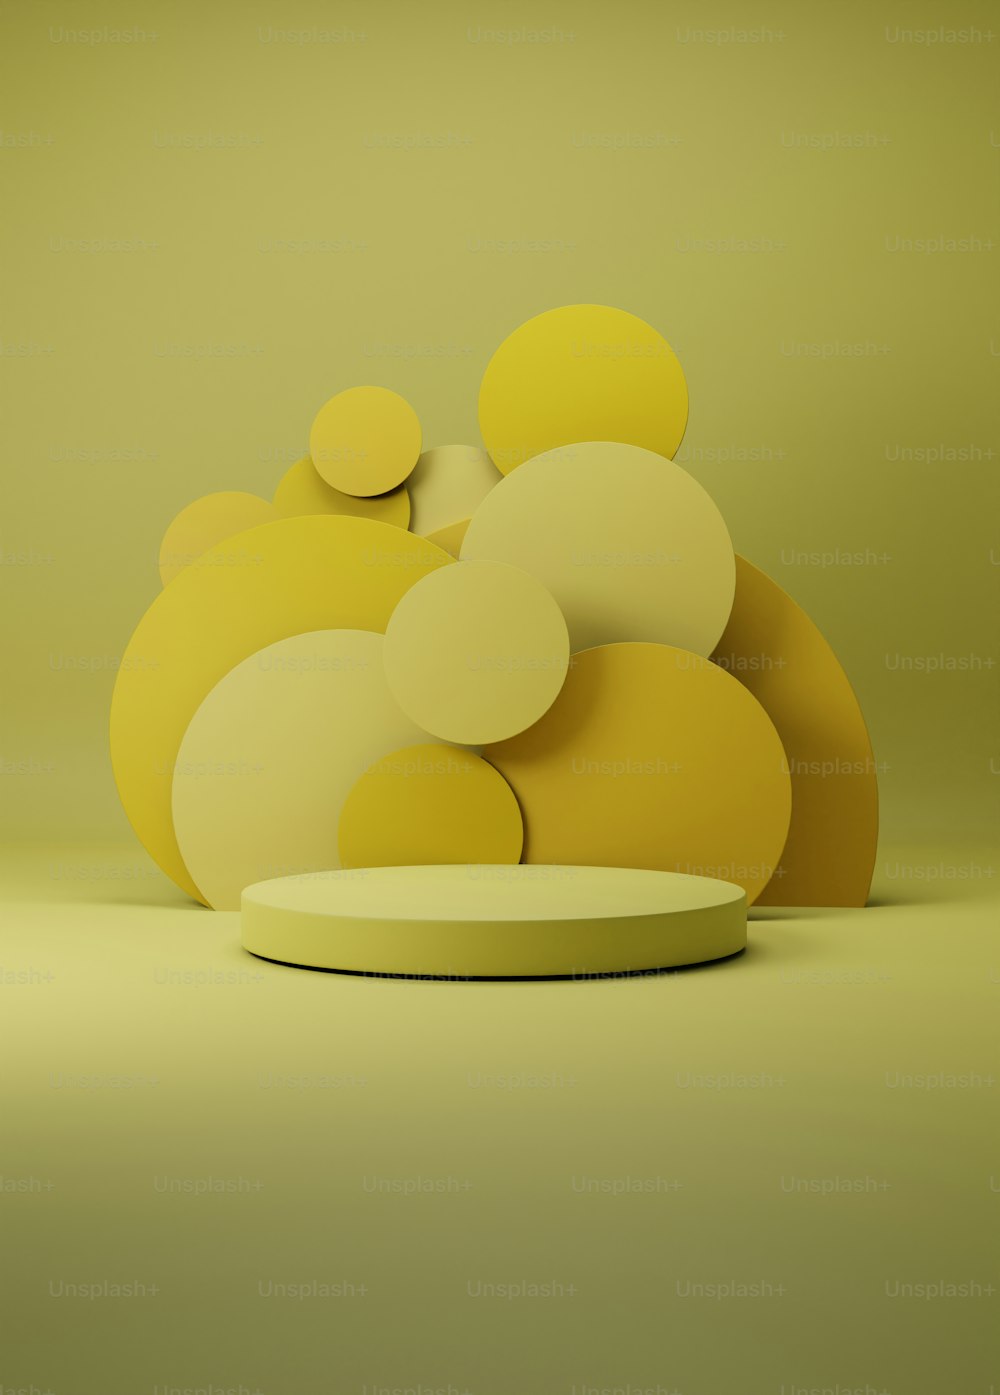 a yellow and white object on a yellow background